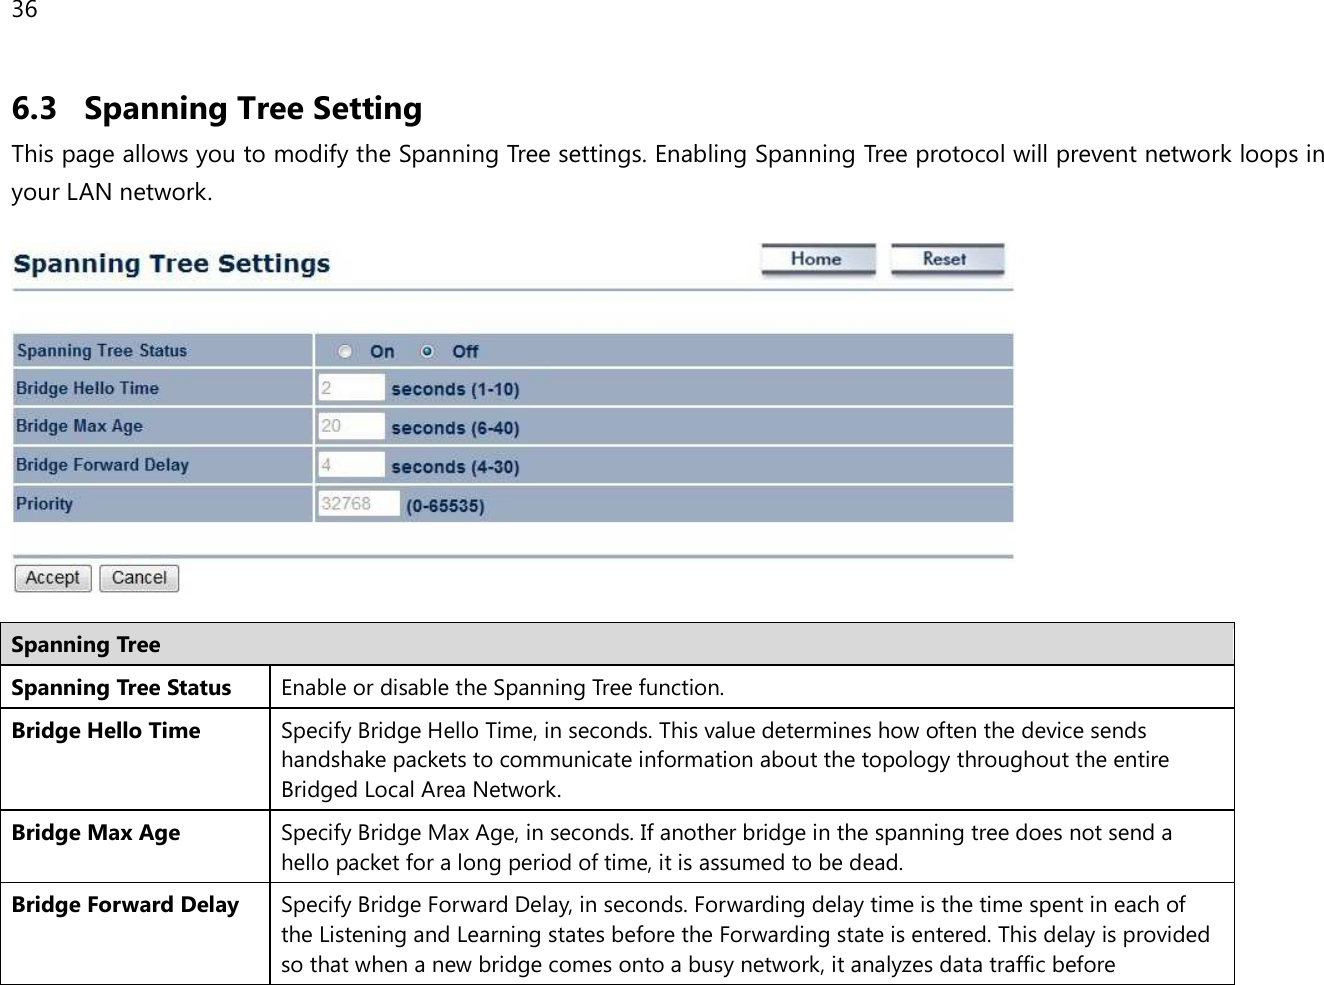 36  6.3 Spanning Tree Setting This page allows you to modify the Spanning Tree settings. Enabling Spanning Tree protocol will prevent network loops in your LAN network.    Spanning Tree Spanning Tree Status Enable or disable the Spanning Tree function. Bridge Hello Time Specify Bridge Hello Time, in seconds. This value determines how often the device sends handshake packets to communicate information about the topology throughout the entire Bridged Local Area Network. Bridge Max Age Specify Bridge Max Age, in seconds. If another bridge in the spanning tree does not send a hello packet for a long period of time, it is assumed to be dead. Bridge Forward Delay Specify Bridge Forward Delay, in seconds. Forwarding delay time is the time spent in each of the Listening and Learning states before the Forwarding state is entered. This delay is provided so that when a new bridge comes onto a busy network, it analyzes data traffic before 